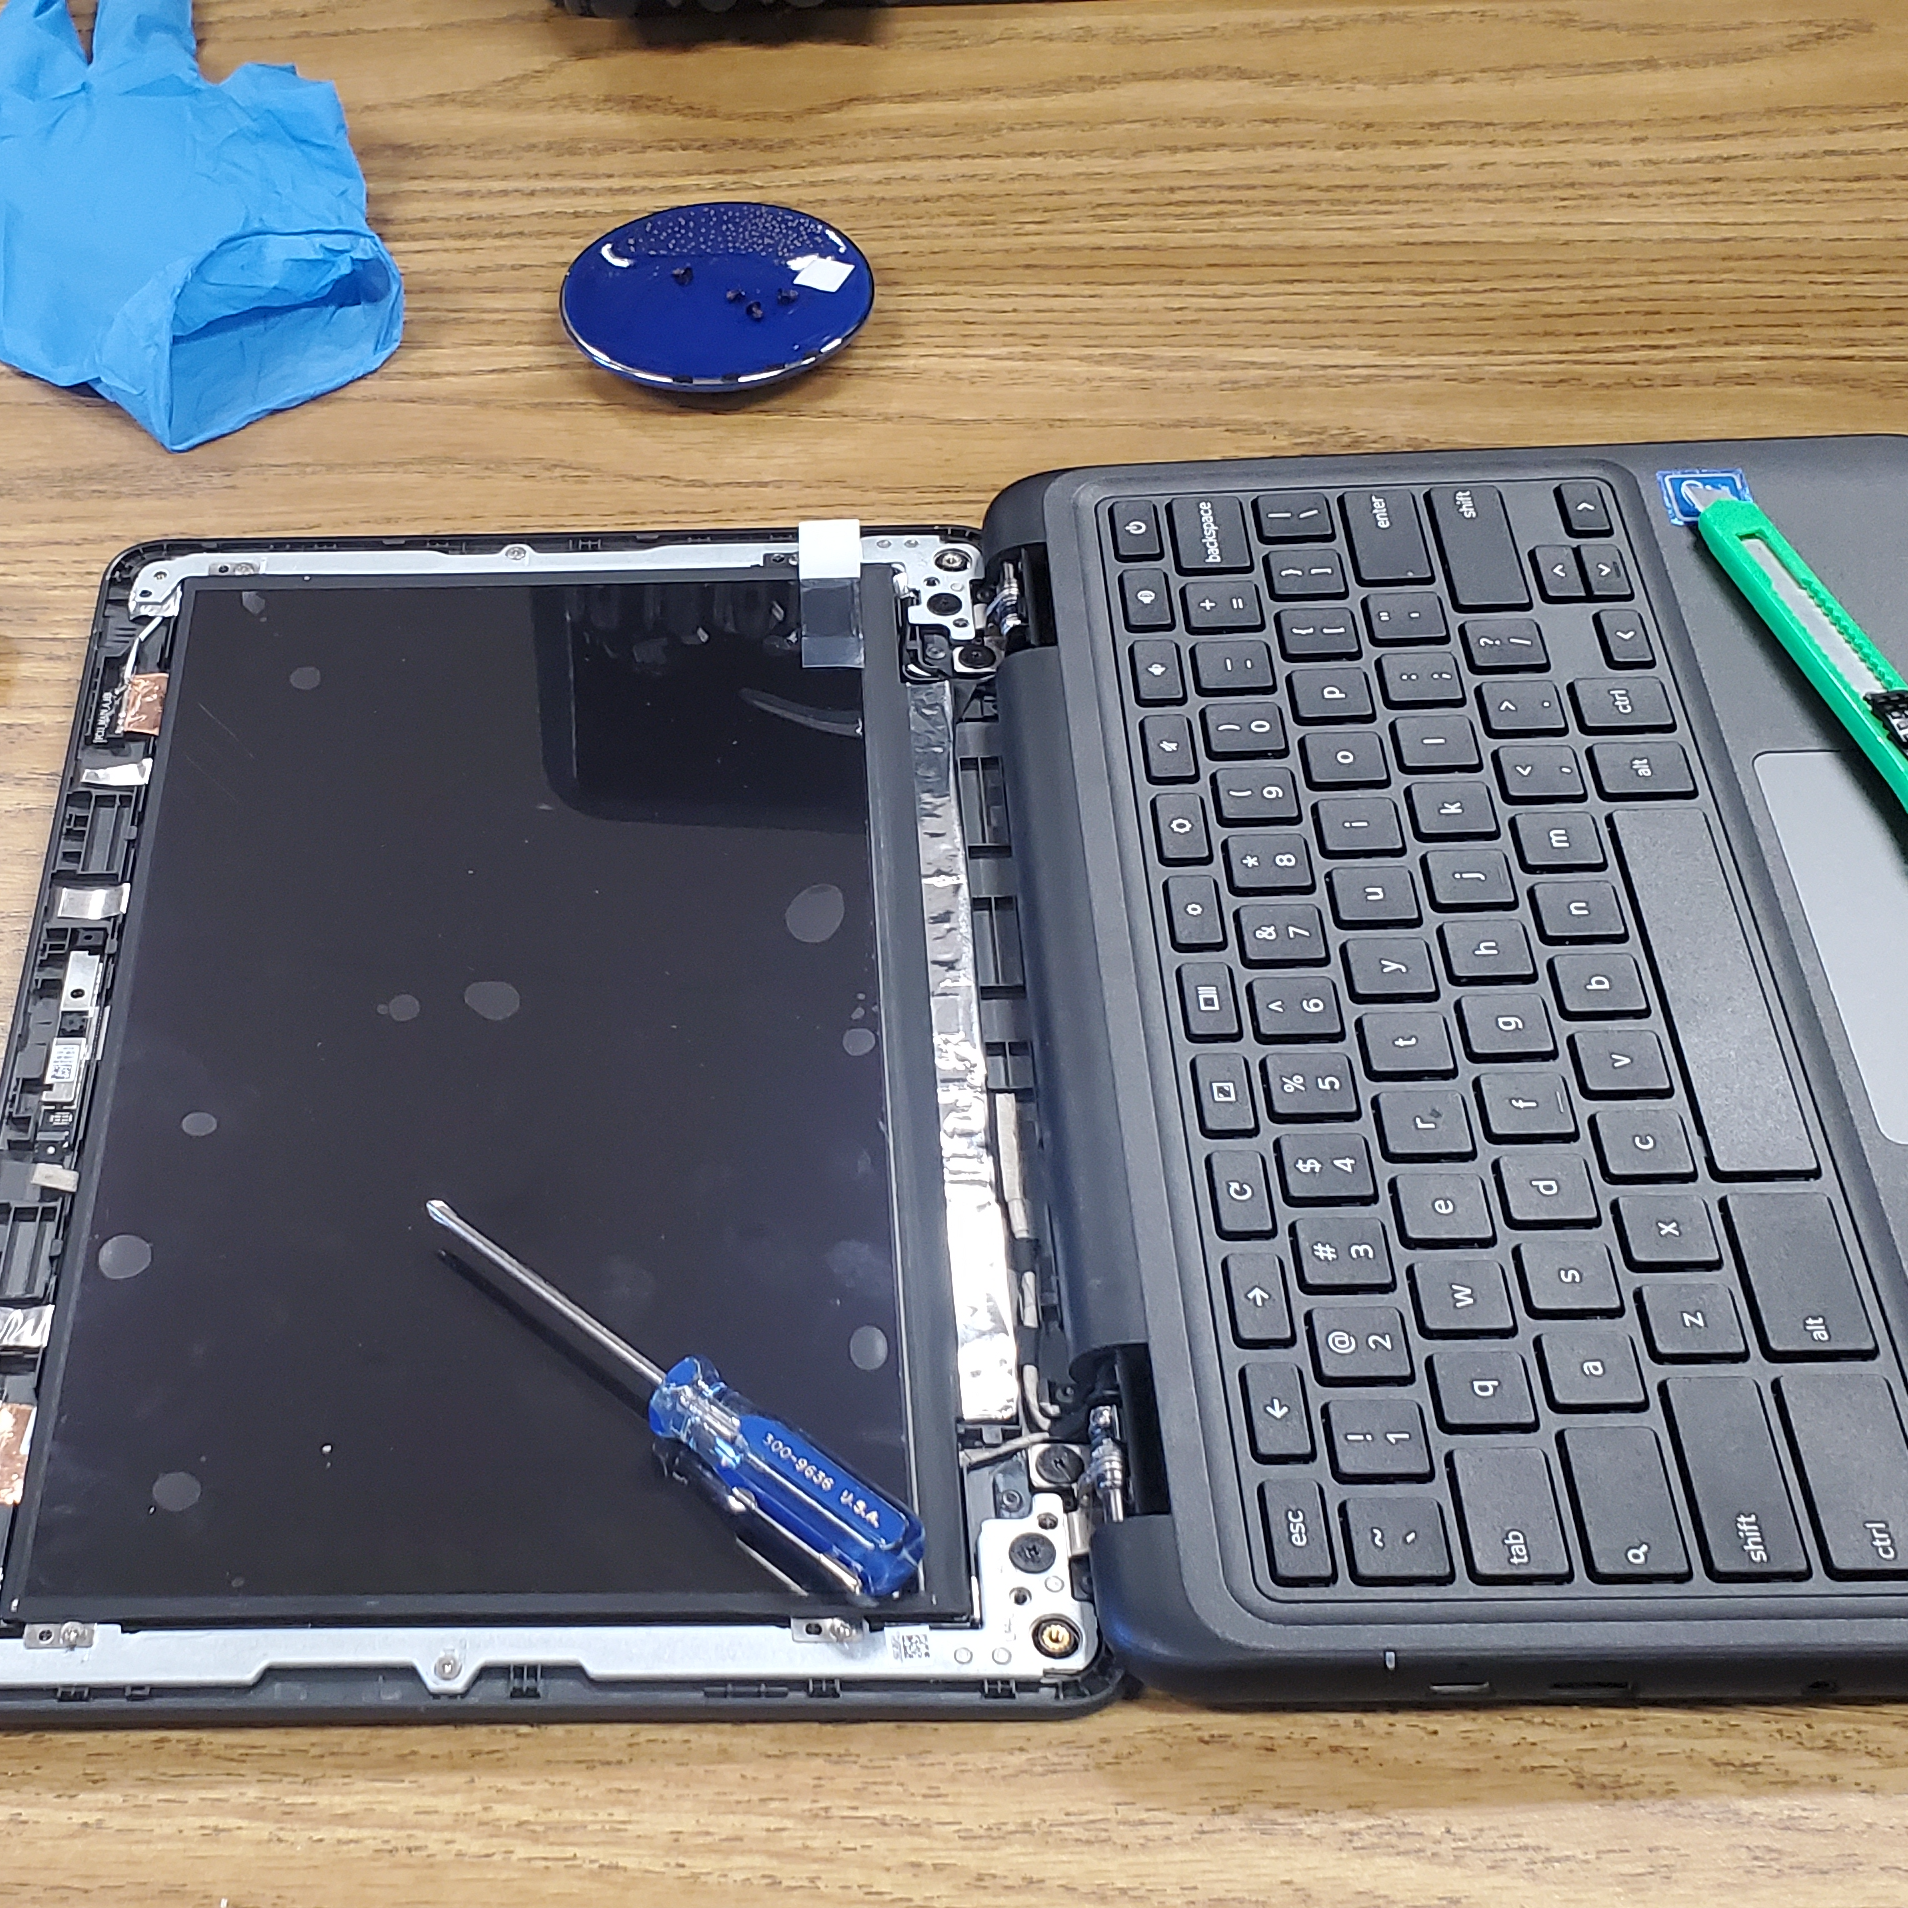 Chromebook or laptop disassembled to repair. The screen is exposed with the front cover removed.